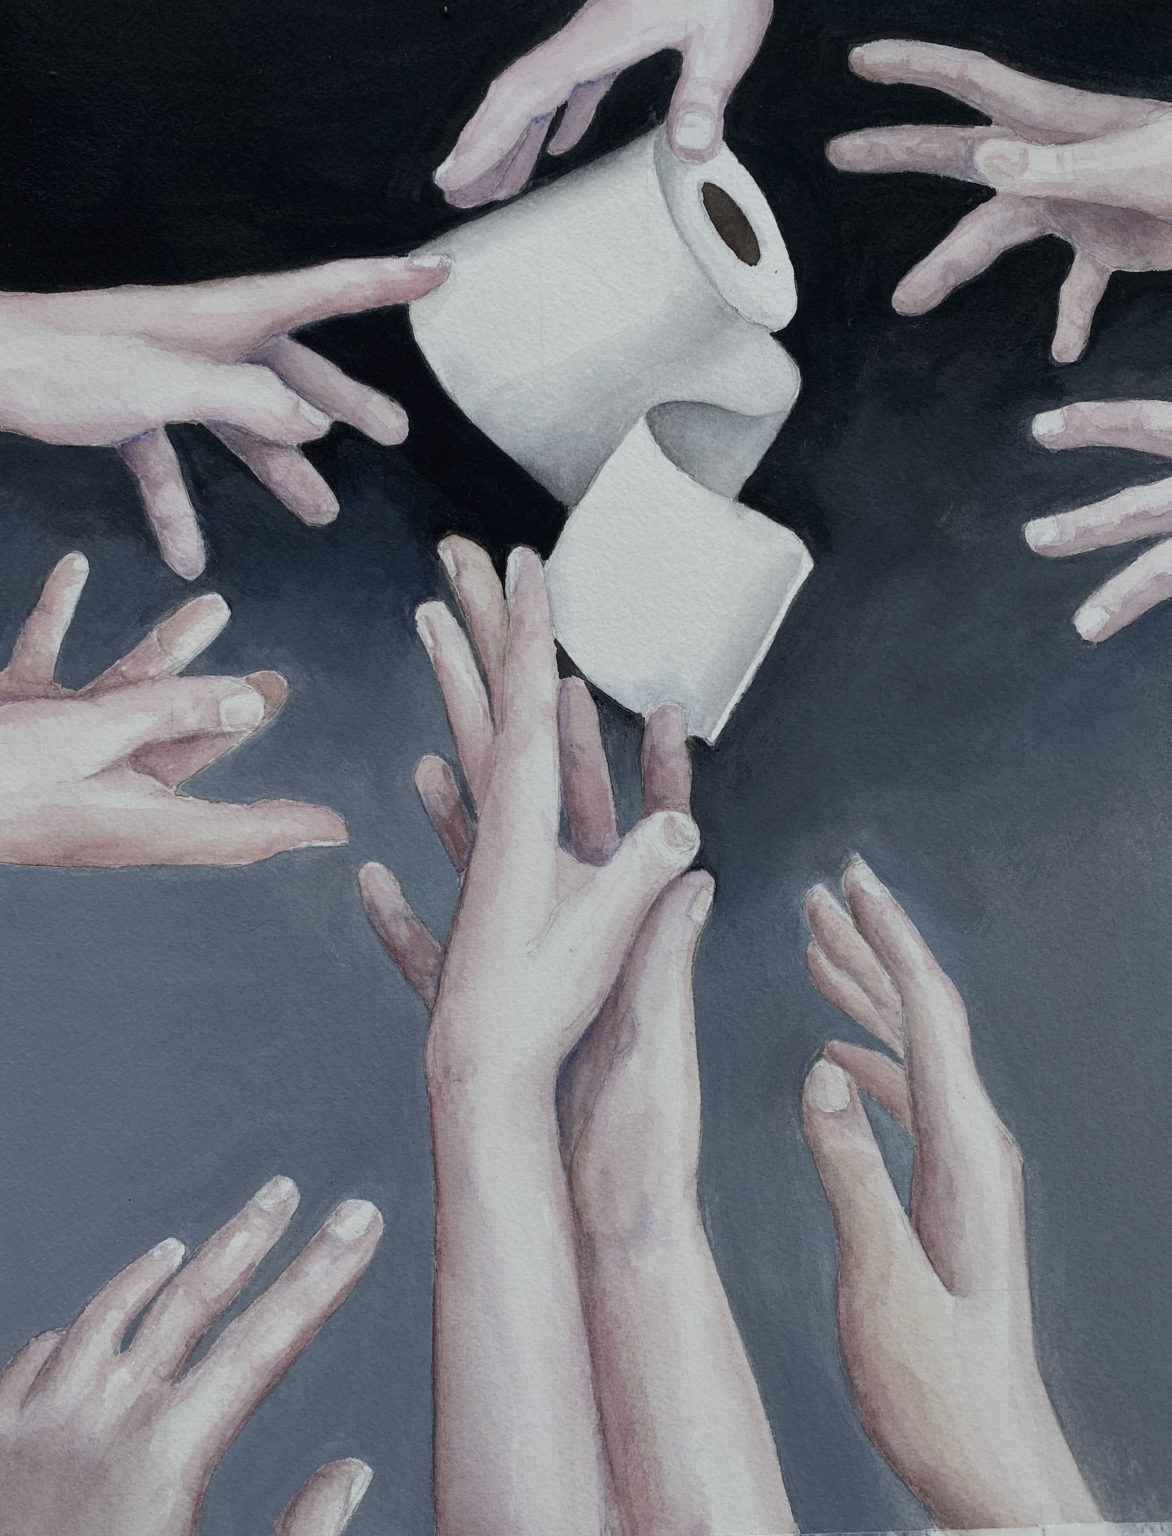 Toilet Paper Grab by Betty Gerich